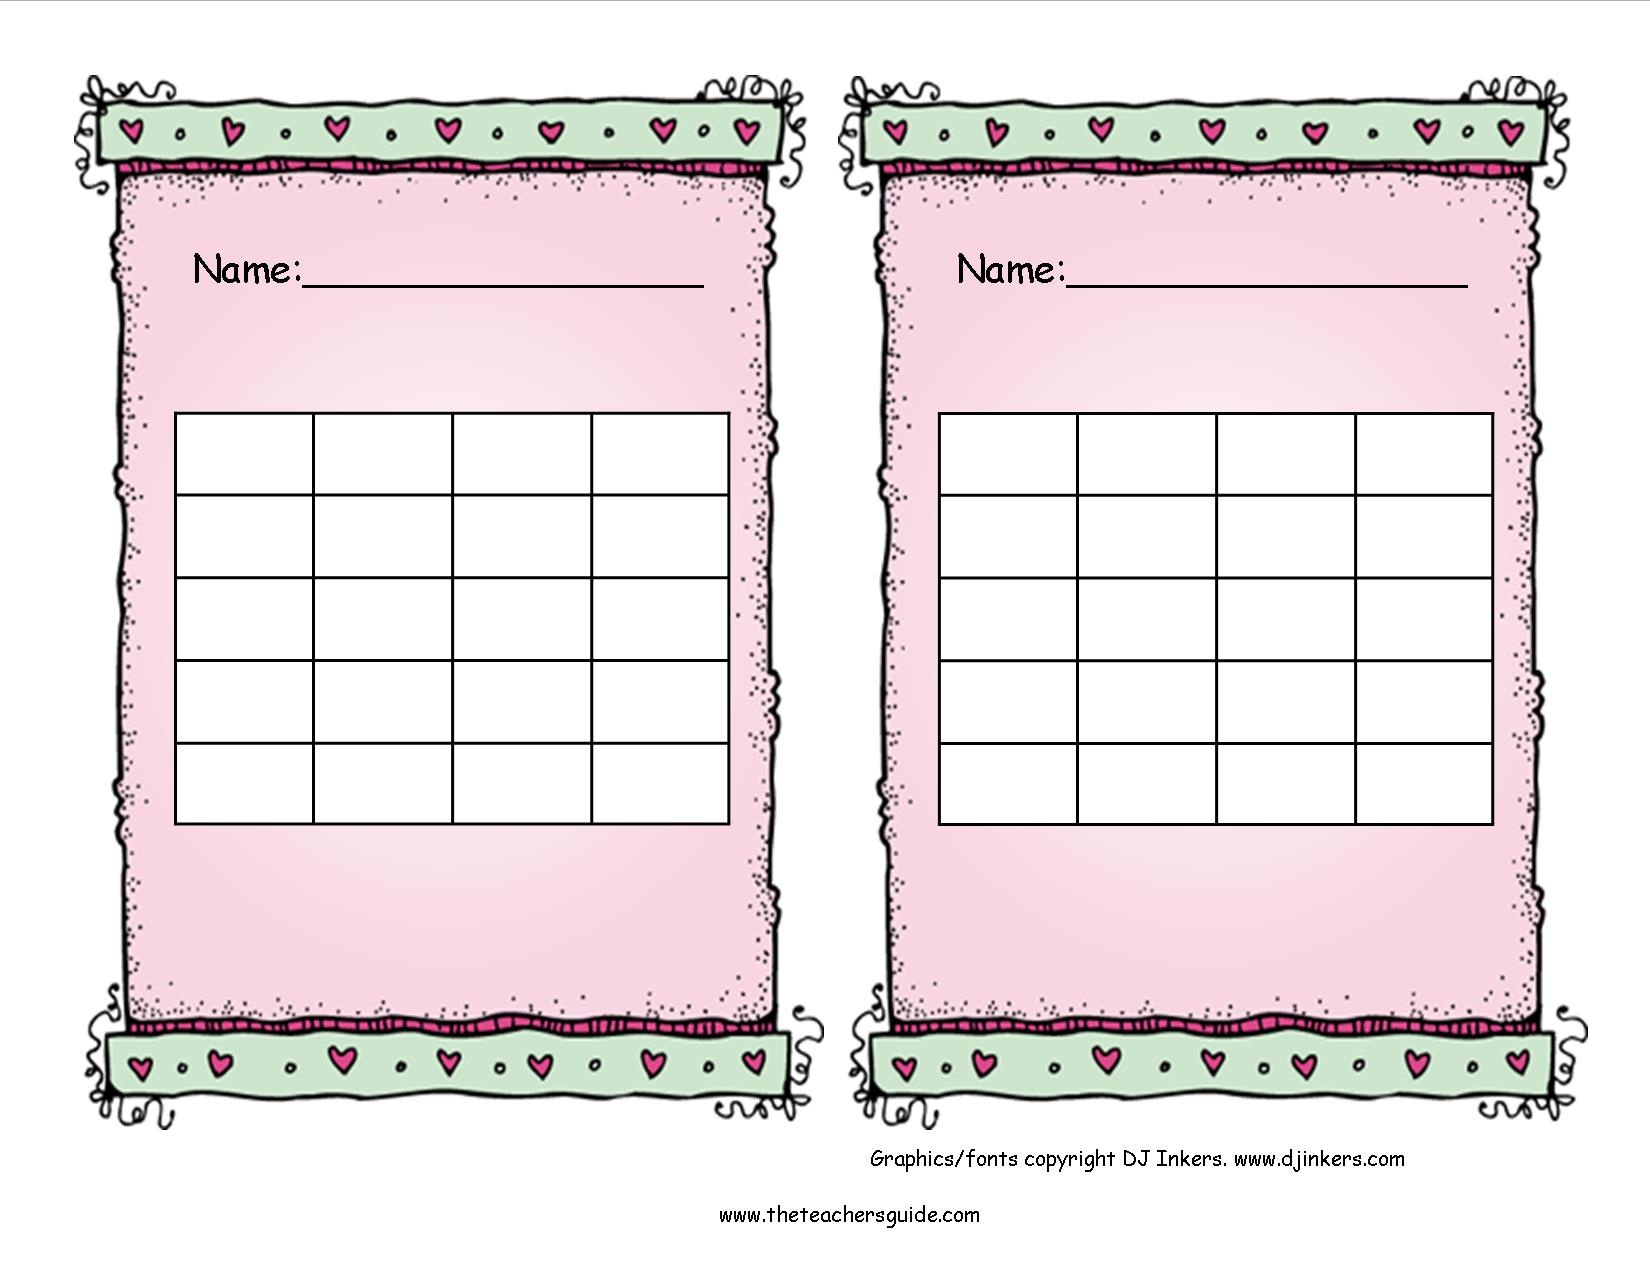 Free Printable Reward And Incentive Charts - Free Printable Charts For Teachers